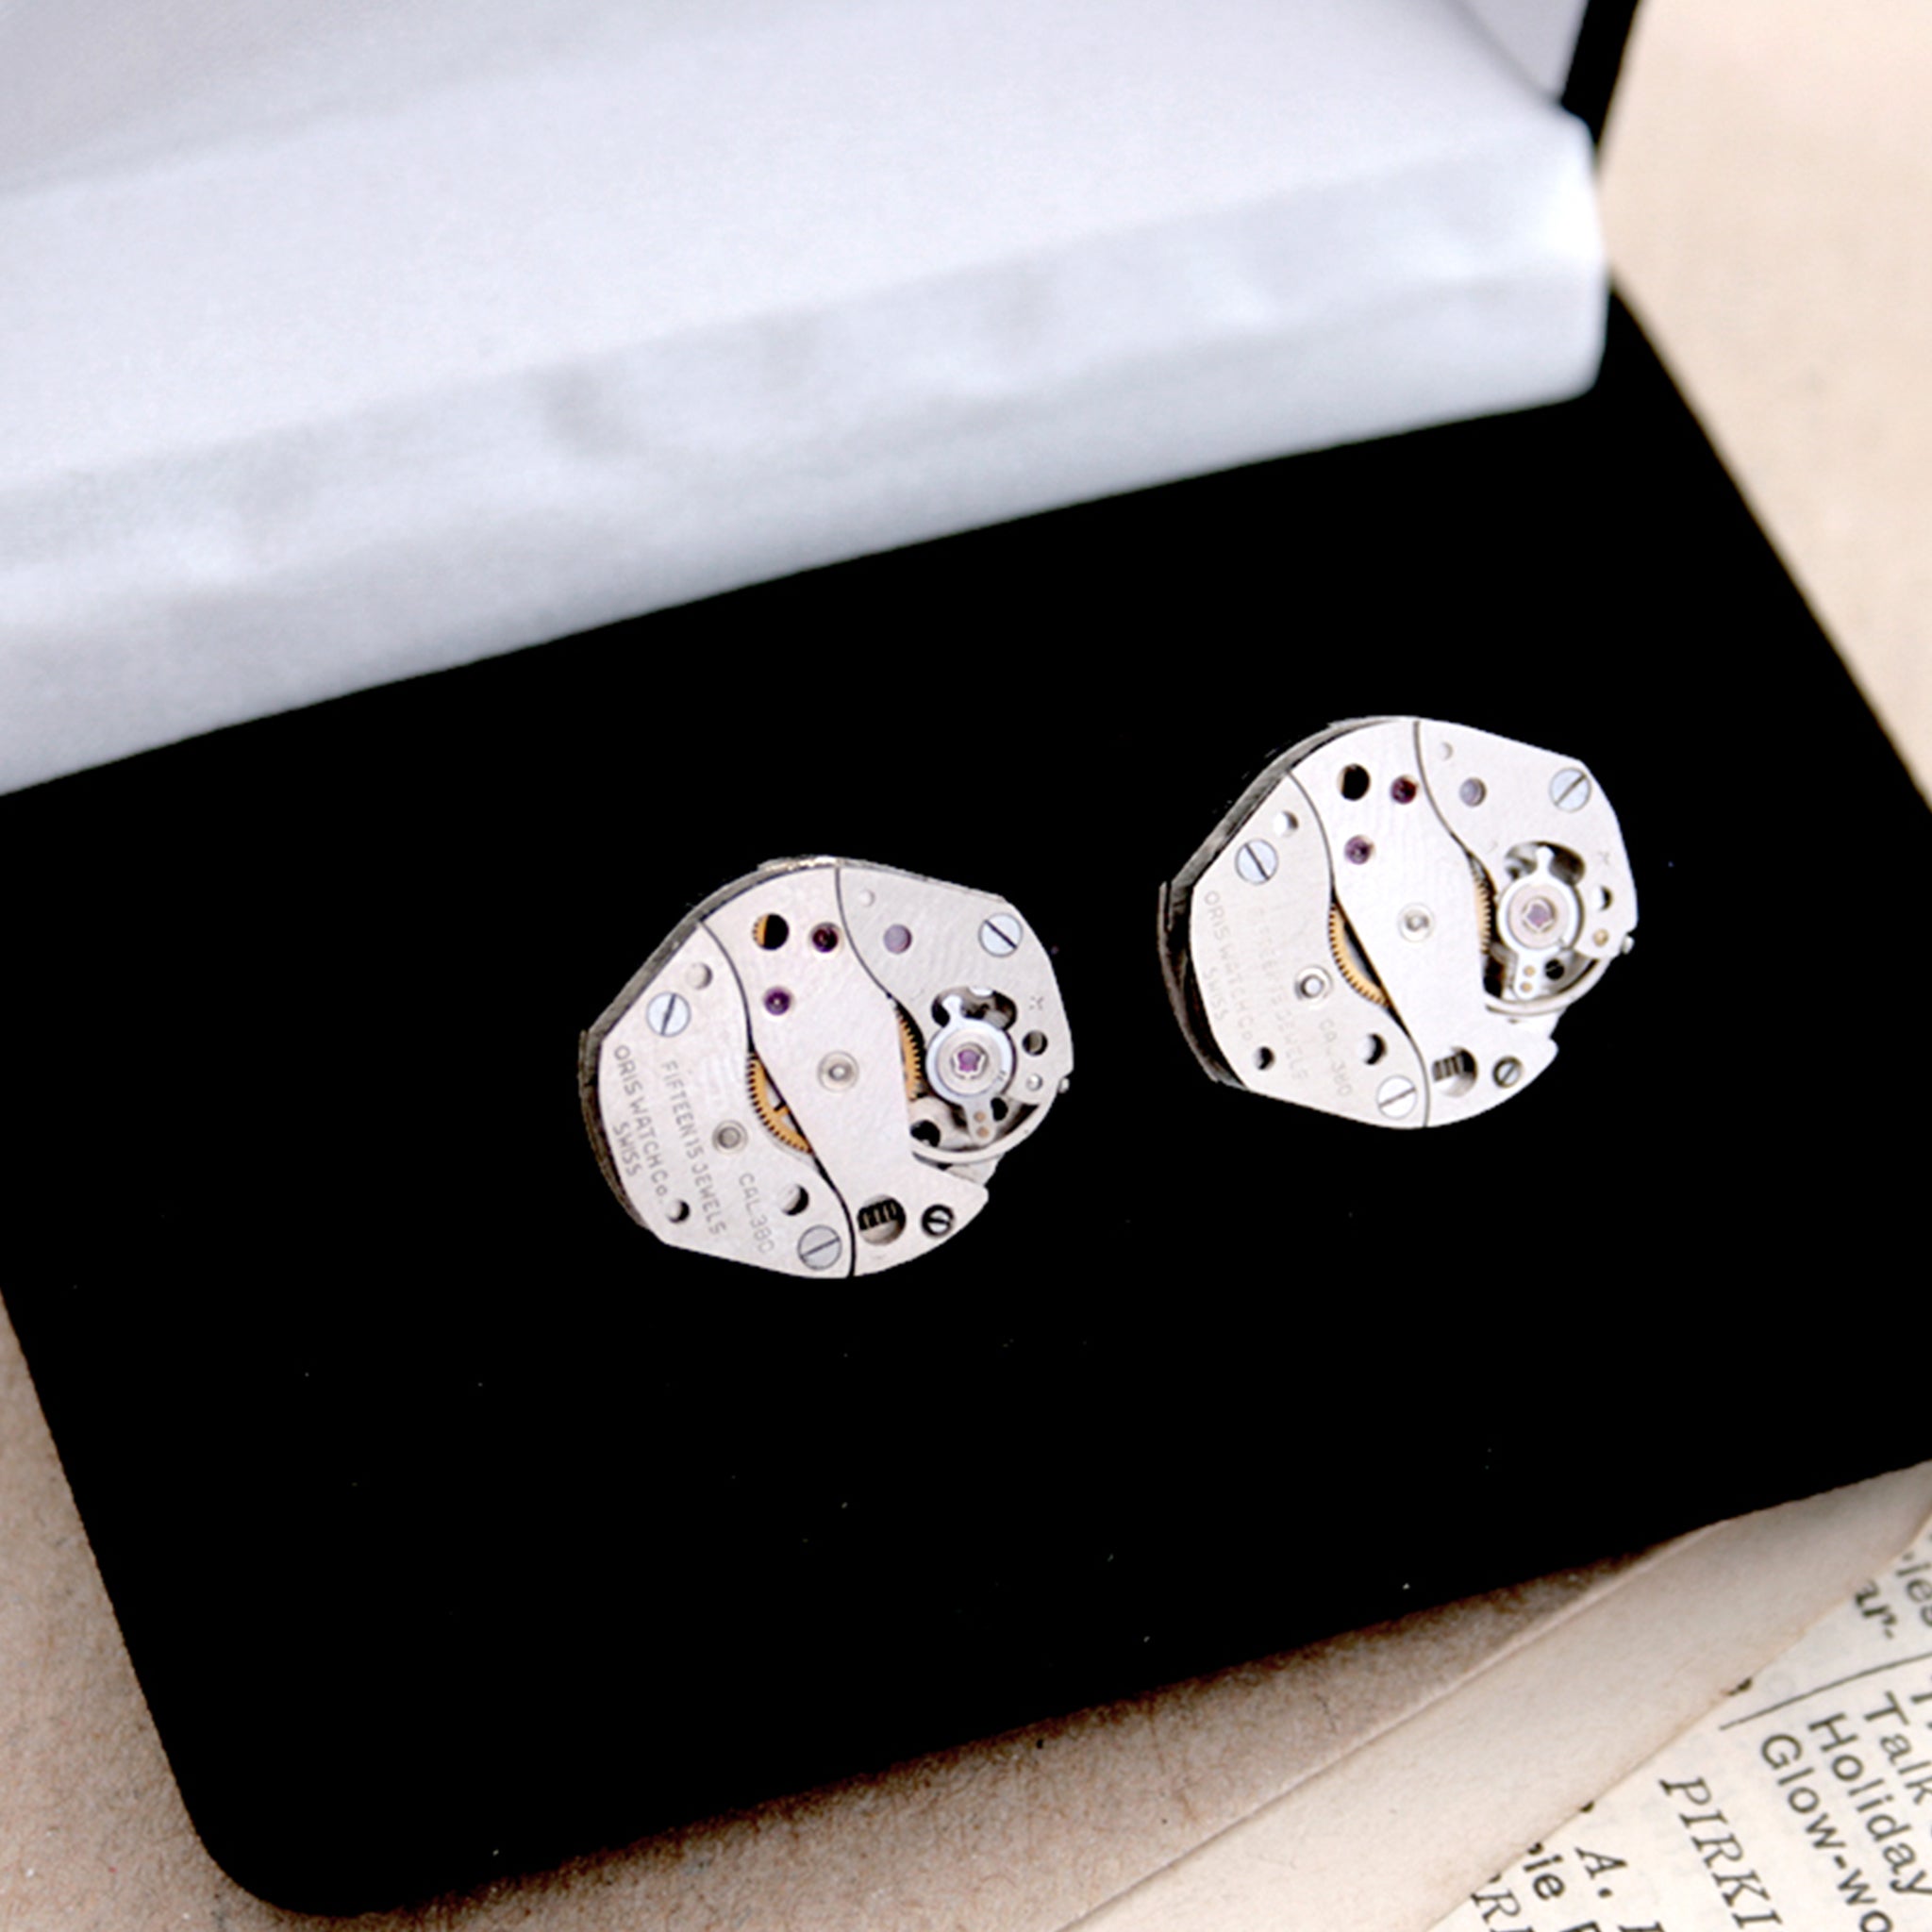 cool watch cufflinks for men featuring antique movements in black velour box